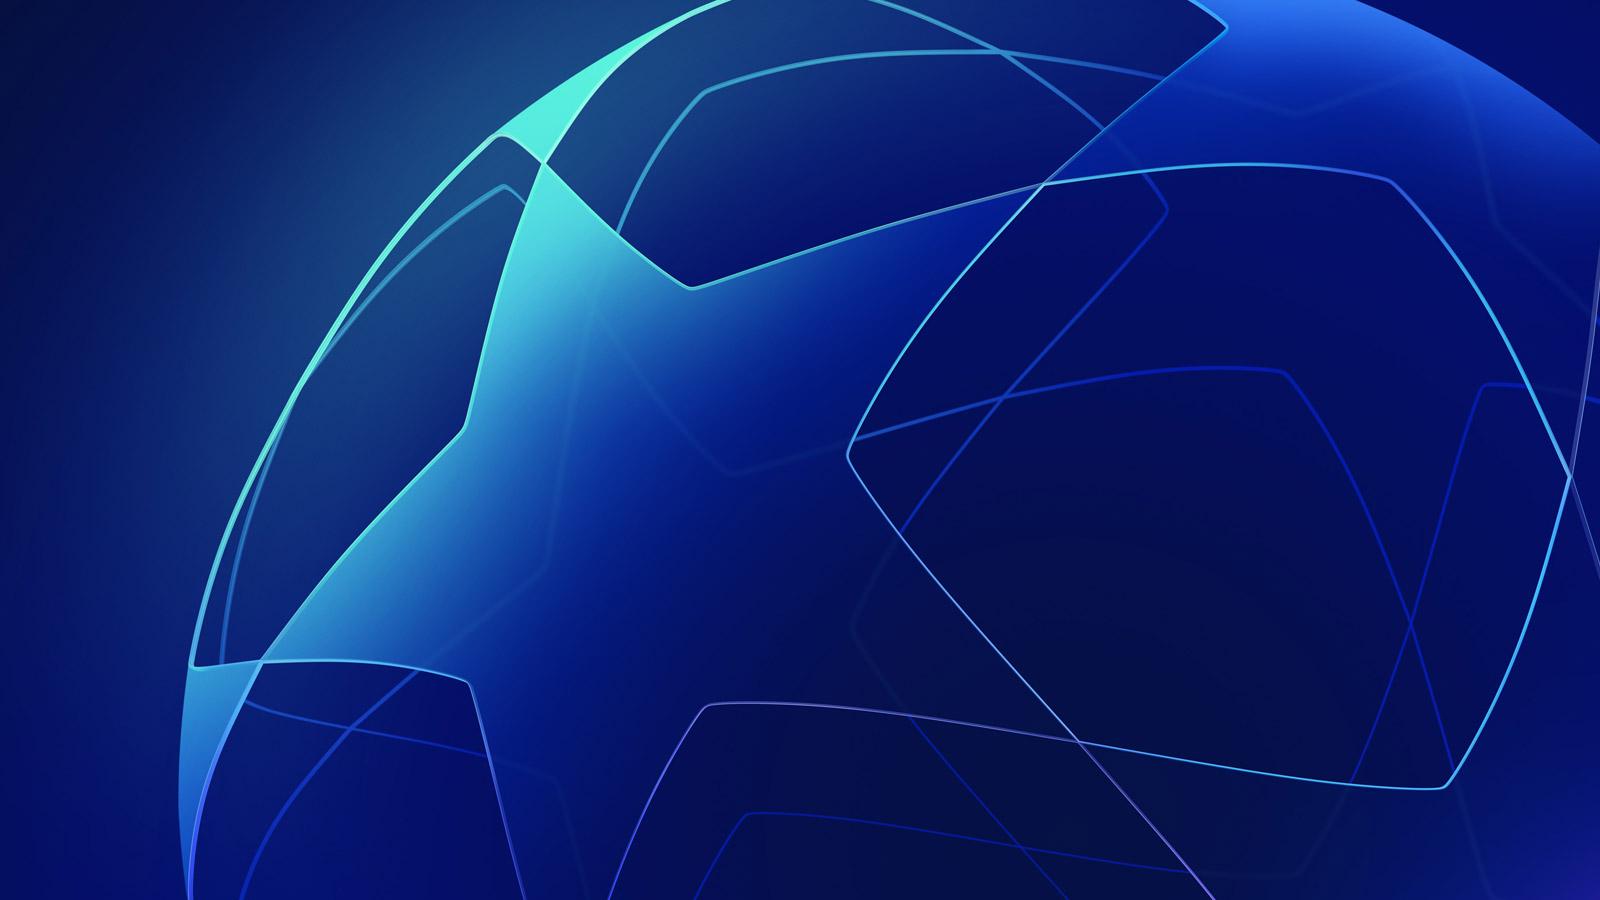 Champions League 2019 Wallpapers - Wallpaper Cave